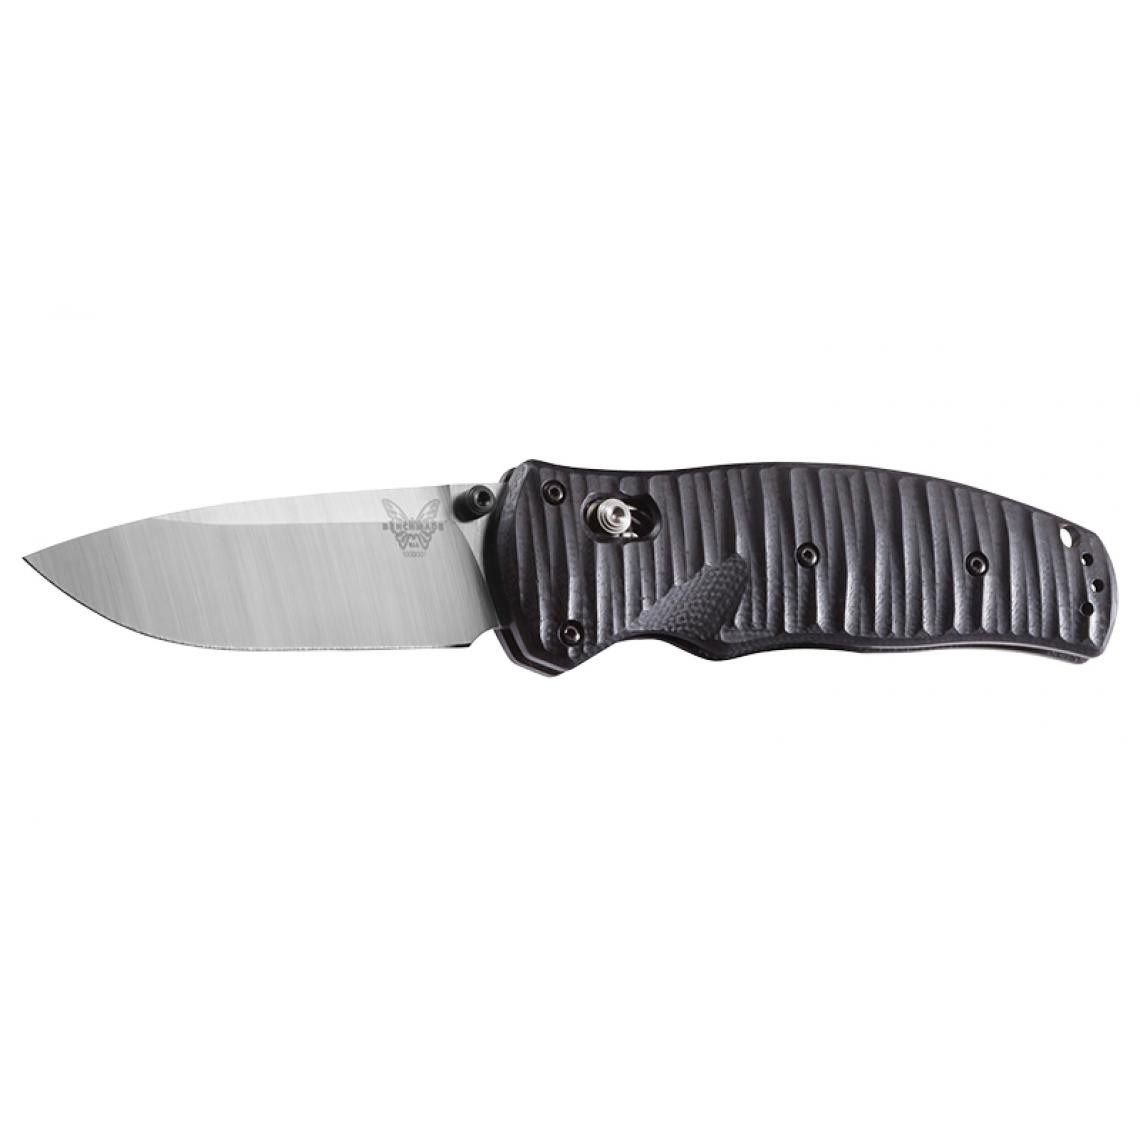 Divers Marques - BENCHMADE - BN1000001 - BENCHMADE - VOLLI - Outils de coupe